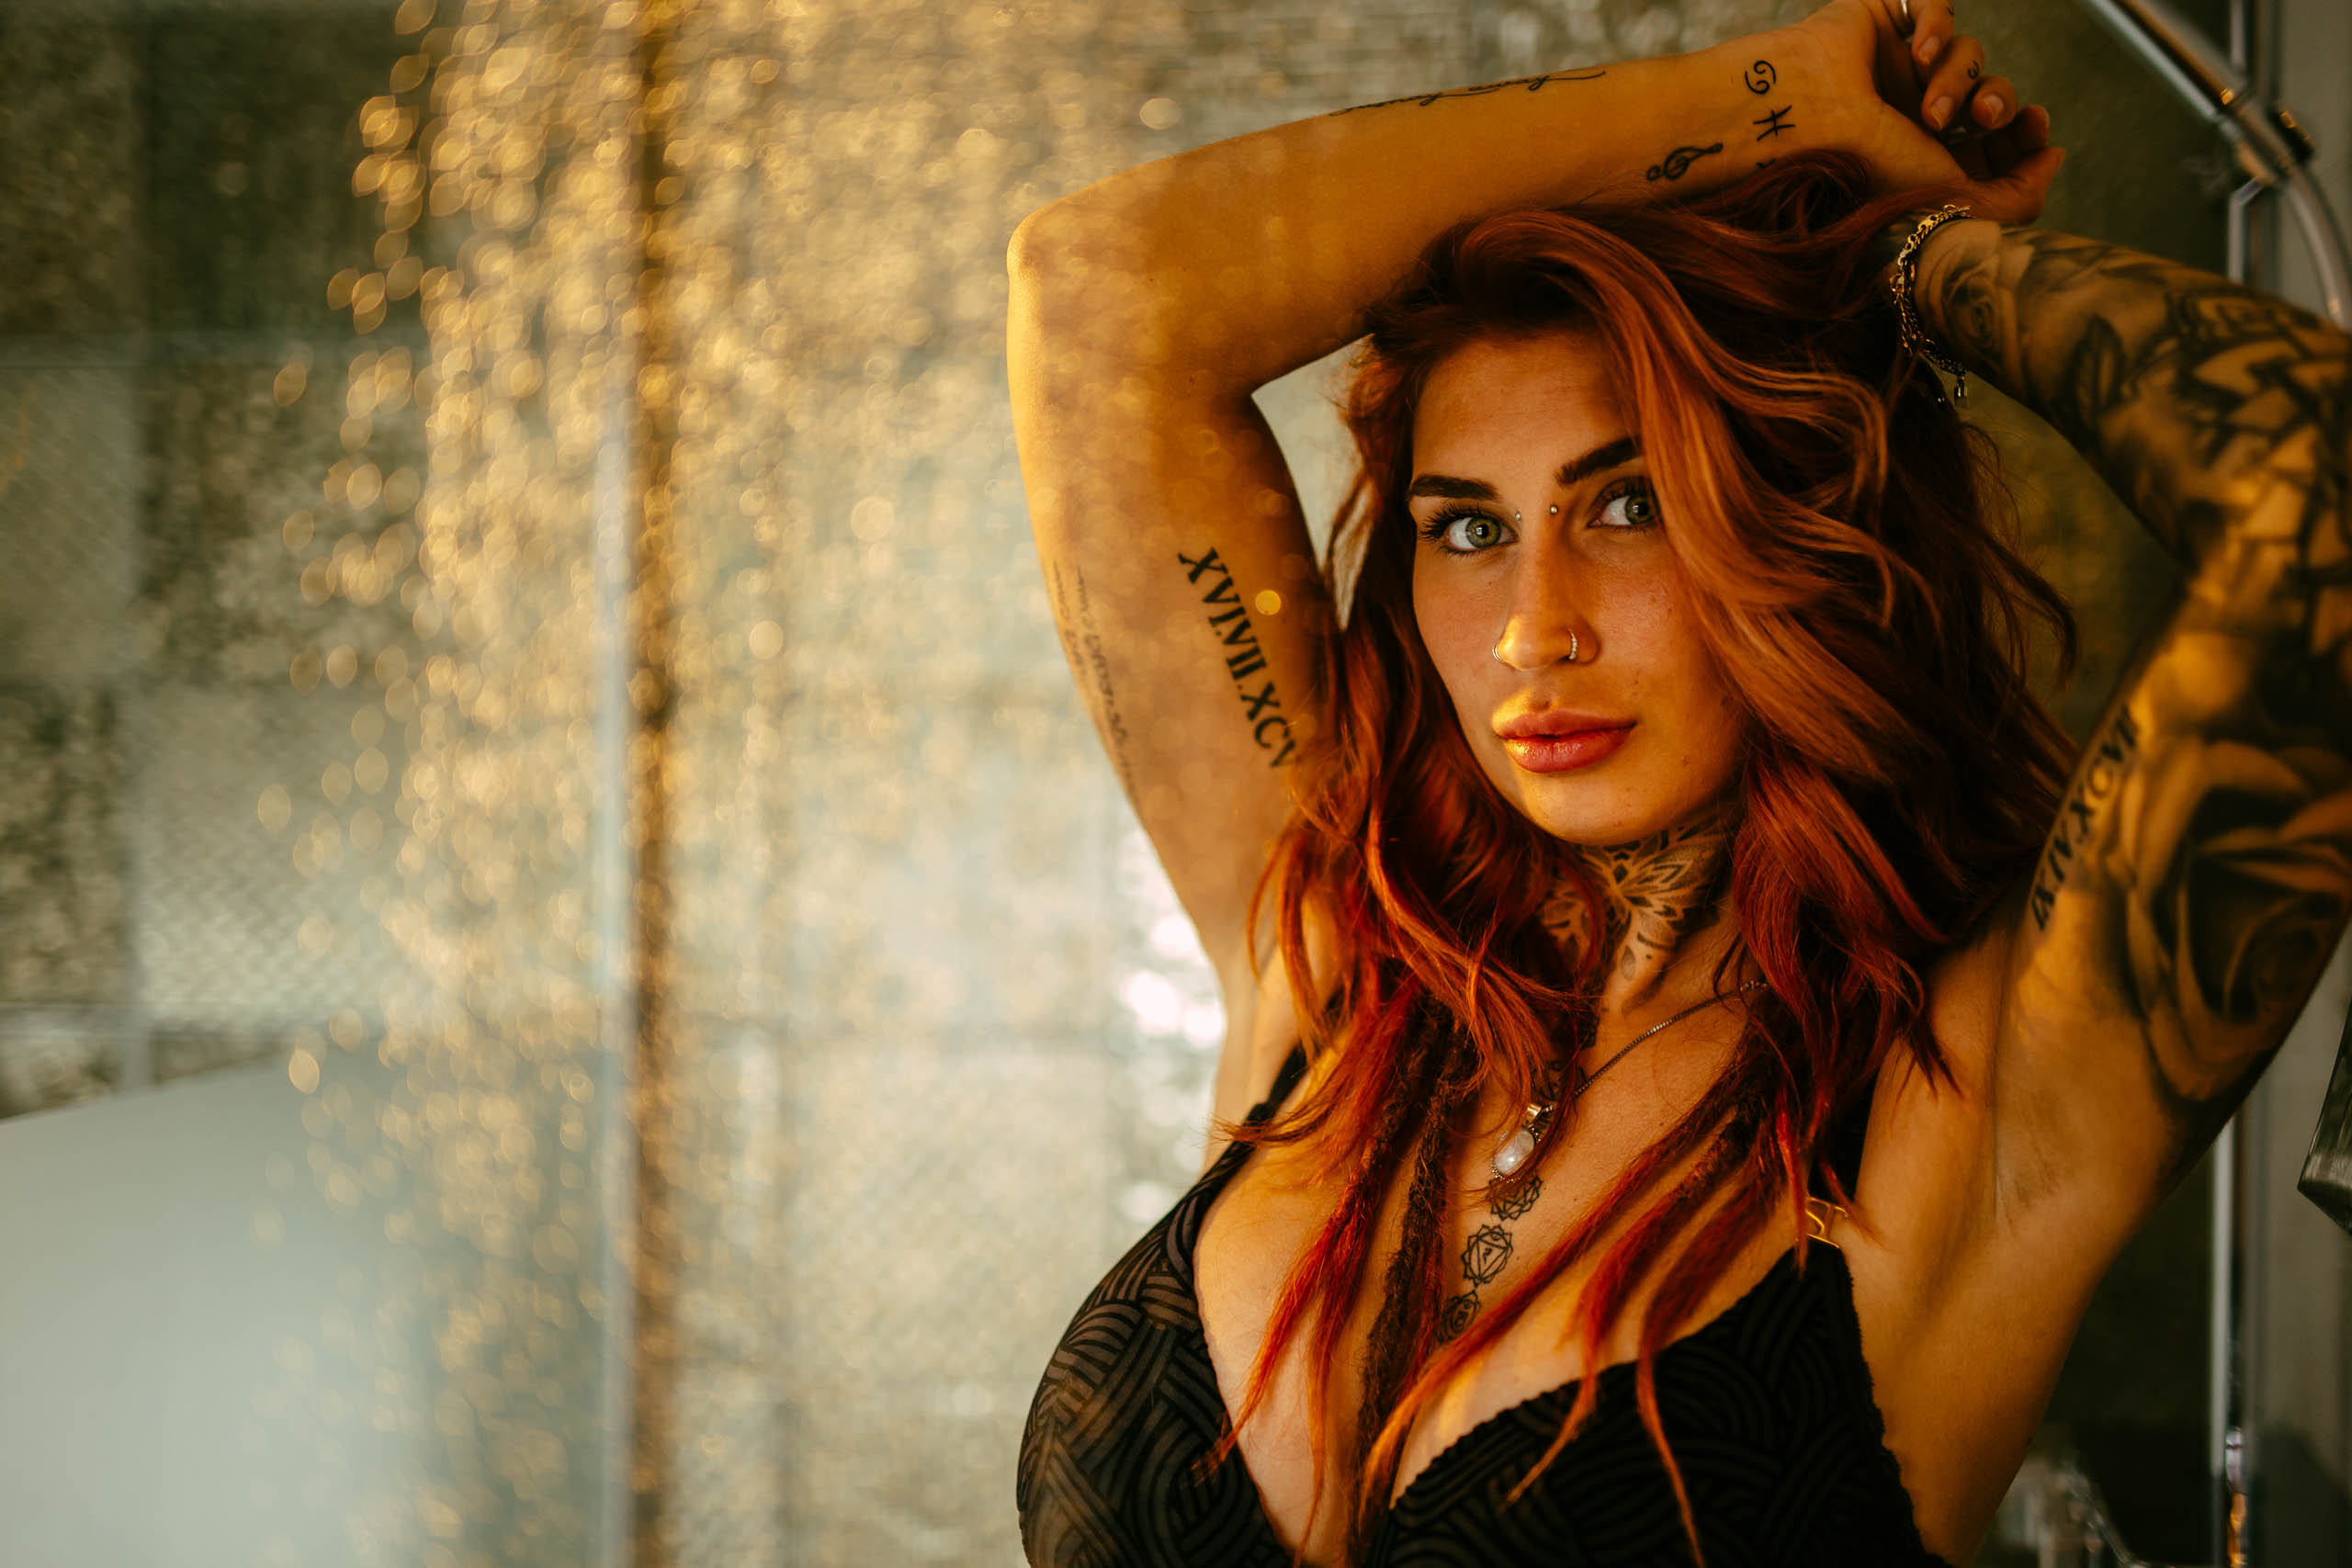 A woman with red hair and tattoos poses in the shower.